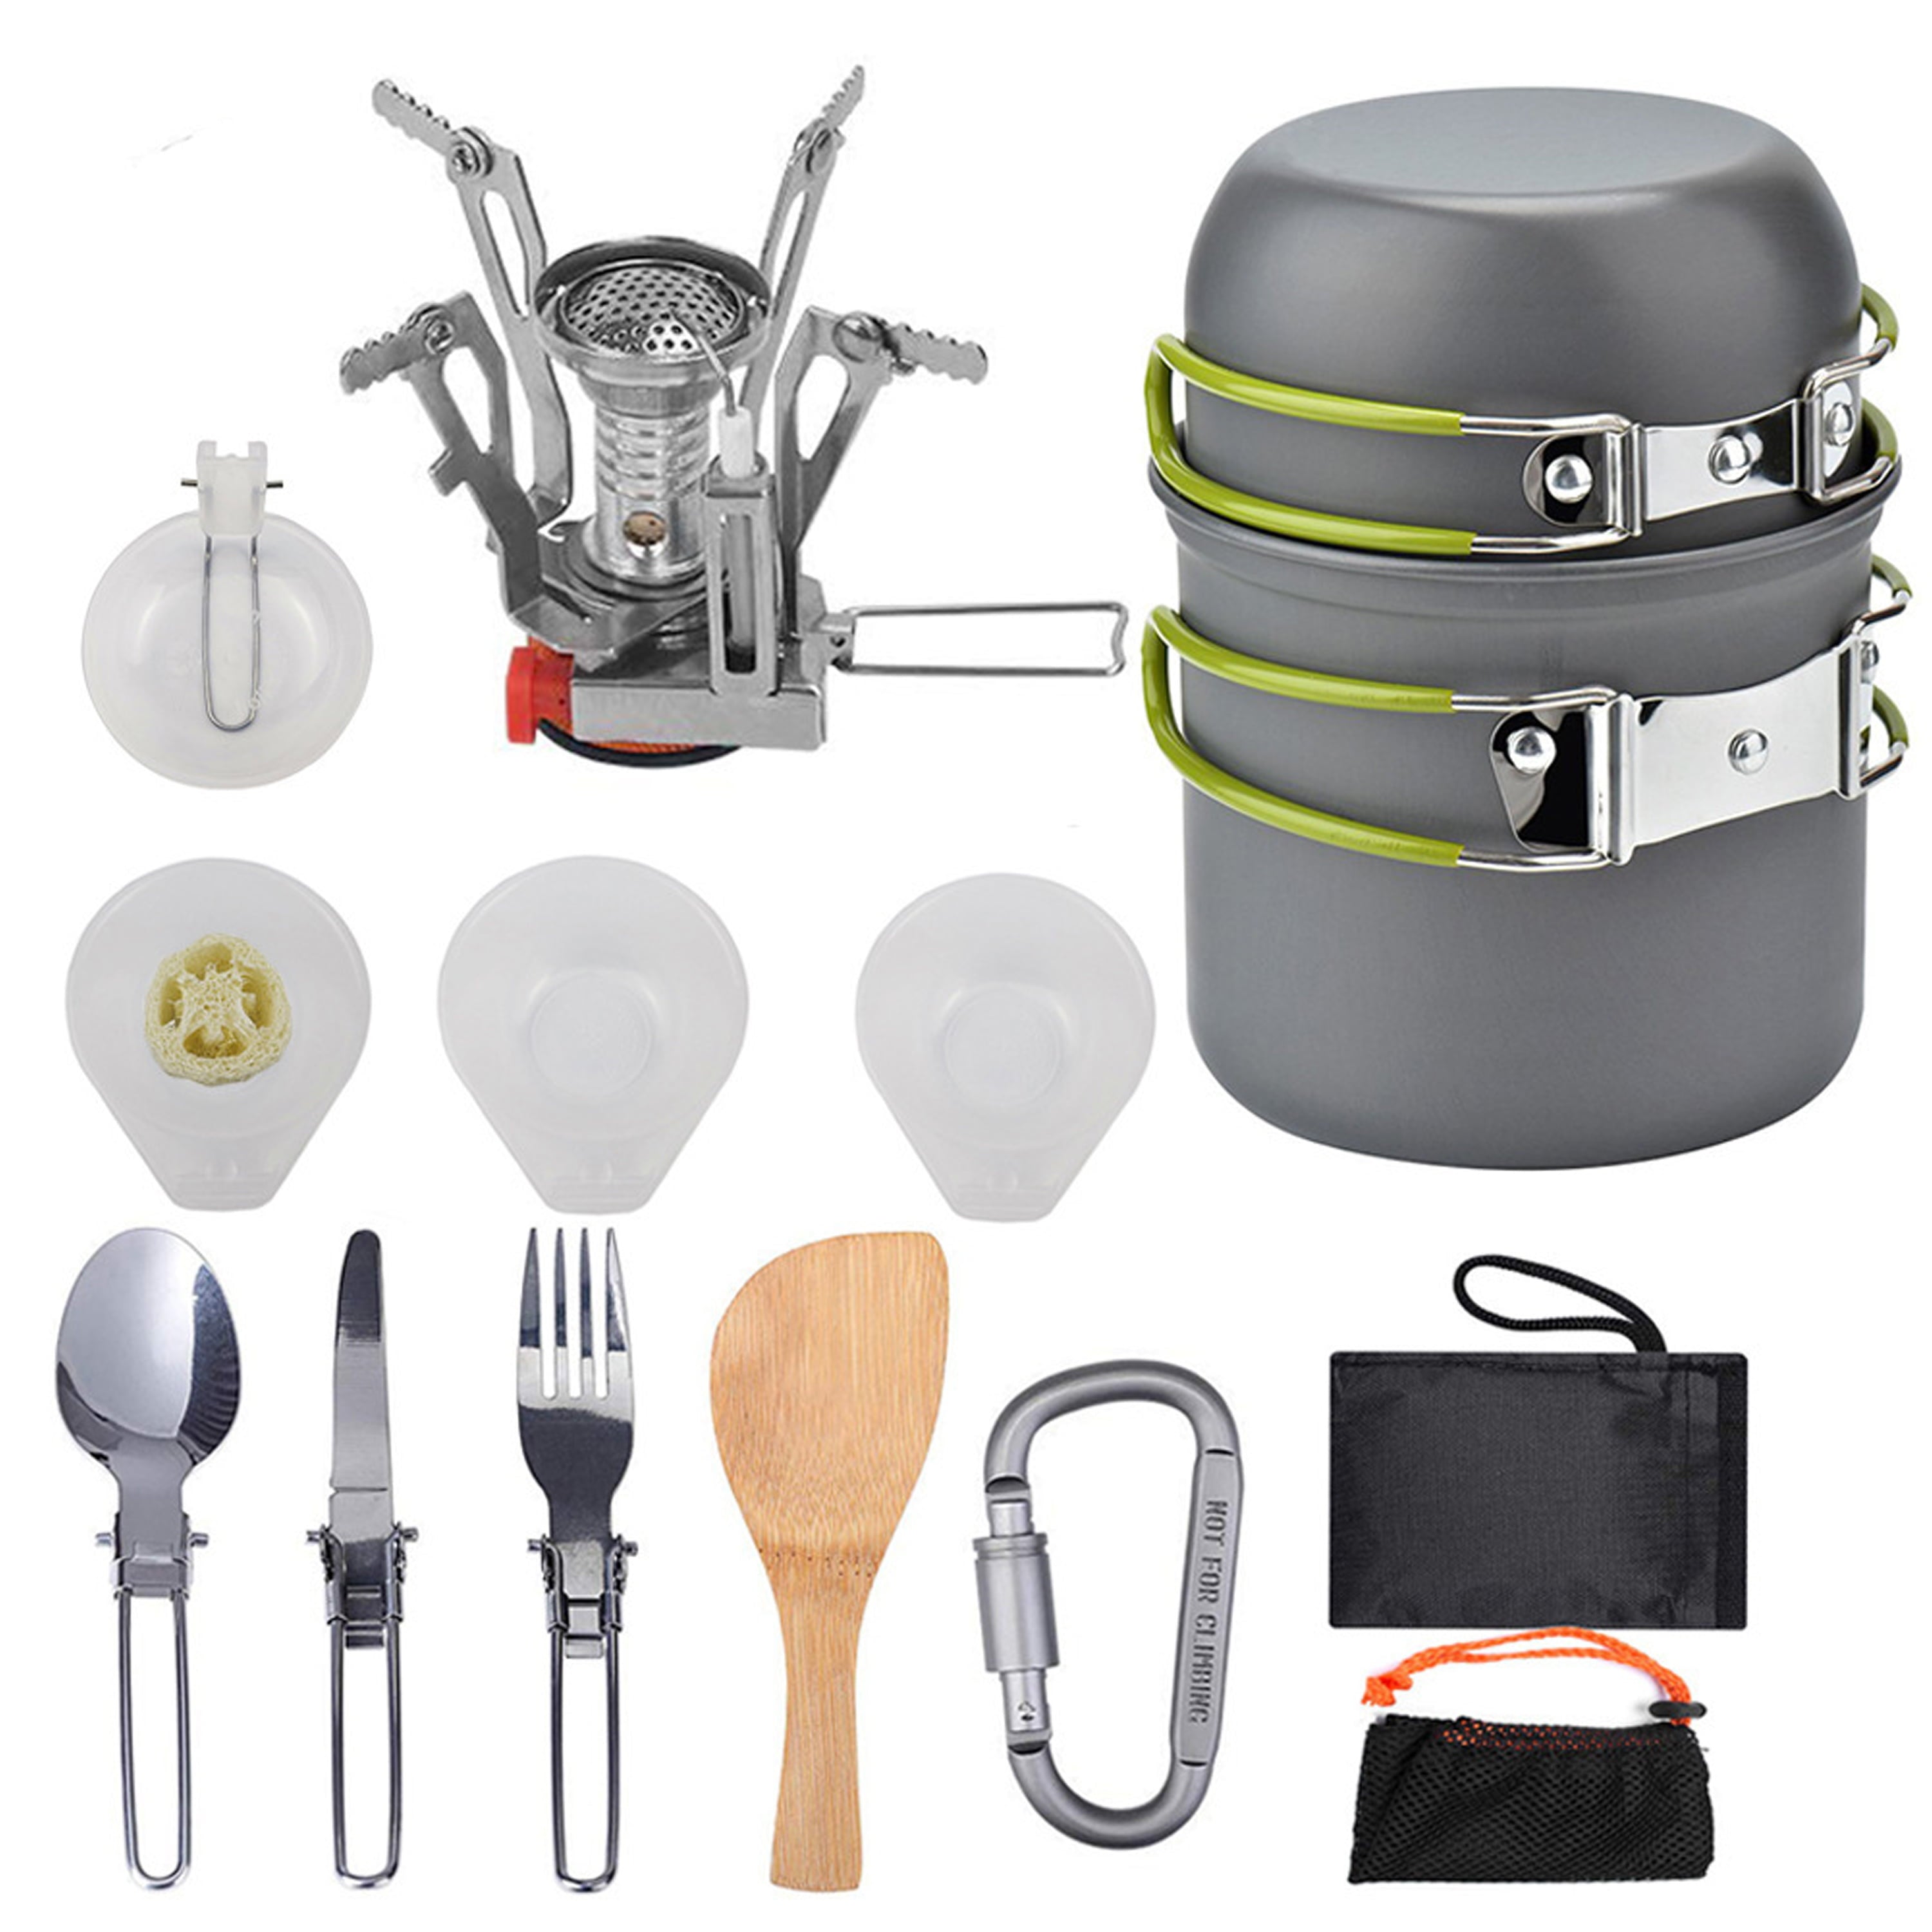 13 PCS Camping Cookware Mess Kit Campfire Kettle Outdoor Hiking Backpacking Picnic Cooking Pot Pan Bowl, Mini Stove, Stainless Steel Cup, Knife Spoon Set